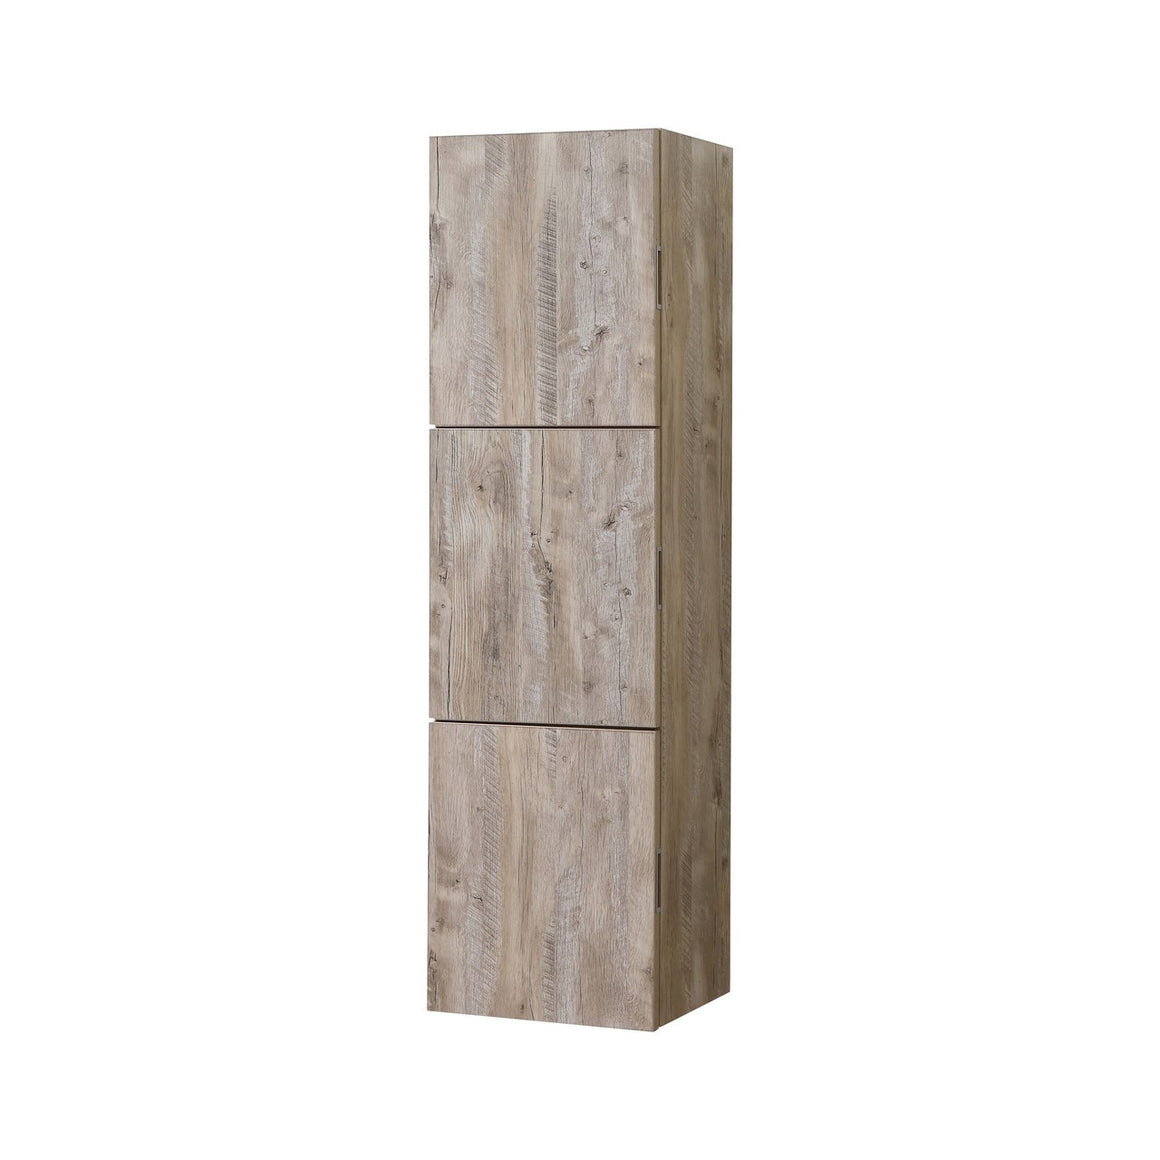 Bliss 18" Wide by 59" High Linen Side Cabinet With Three Doors in Nature Wood Finish